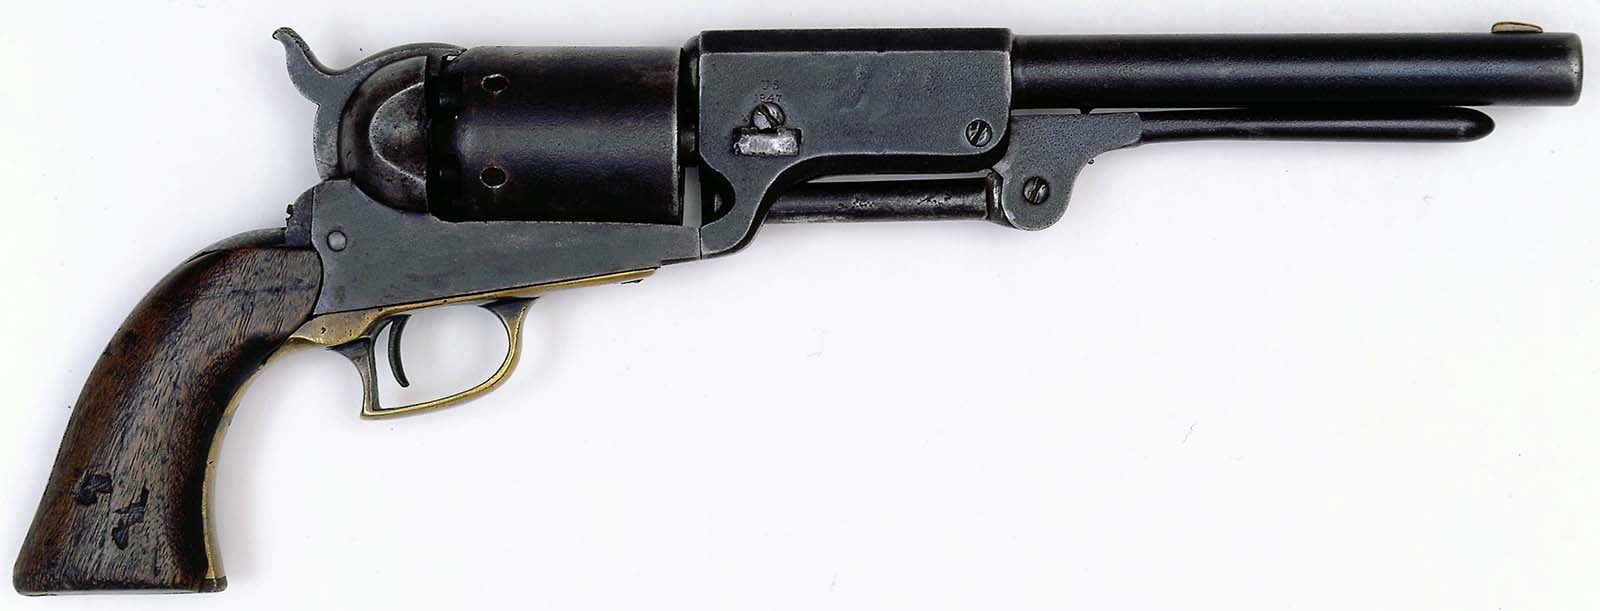 Samuel Colt collaborated with Samuel Walker of Texas Ranger fame to create the Colt Walker revolver in 1847. Sometimes also known as the Walker Colt, the new revolver became one of the best-known horse handguns. Gift of the Gordon T. Matson Family. 1996.12.1